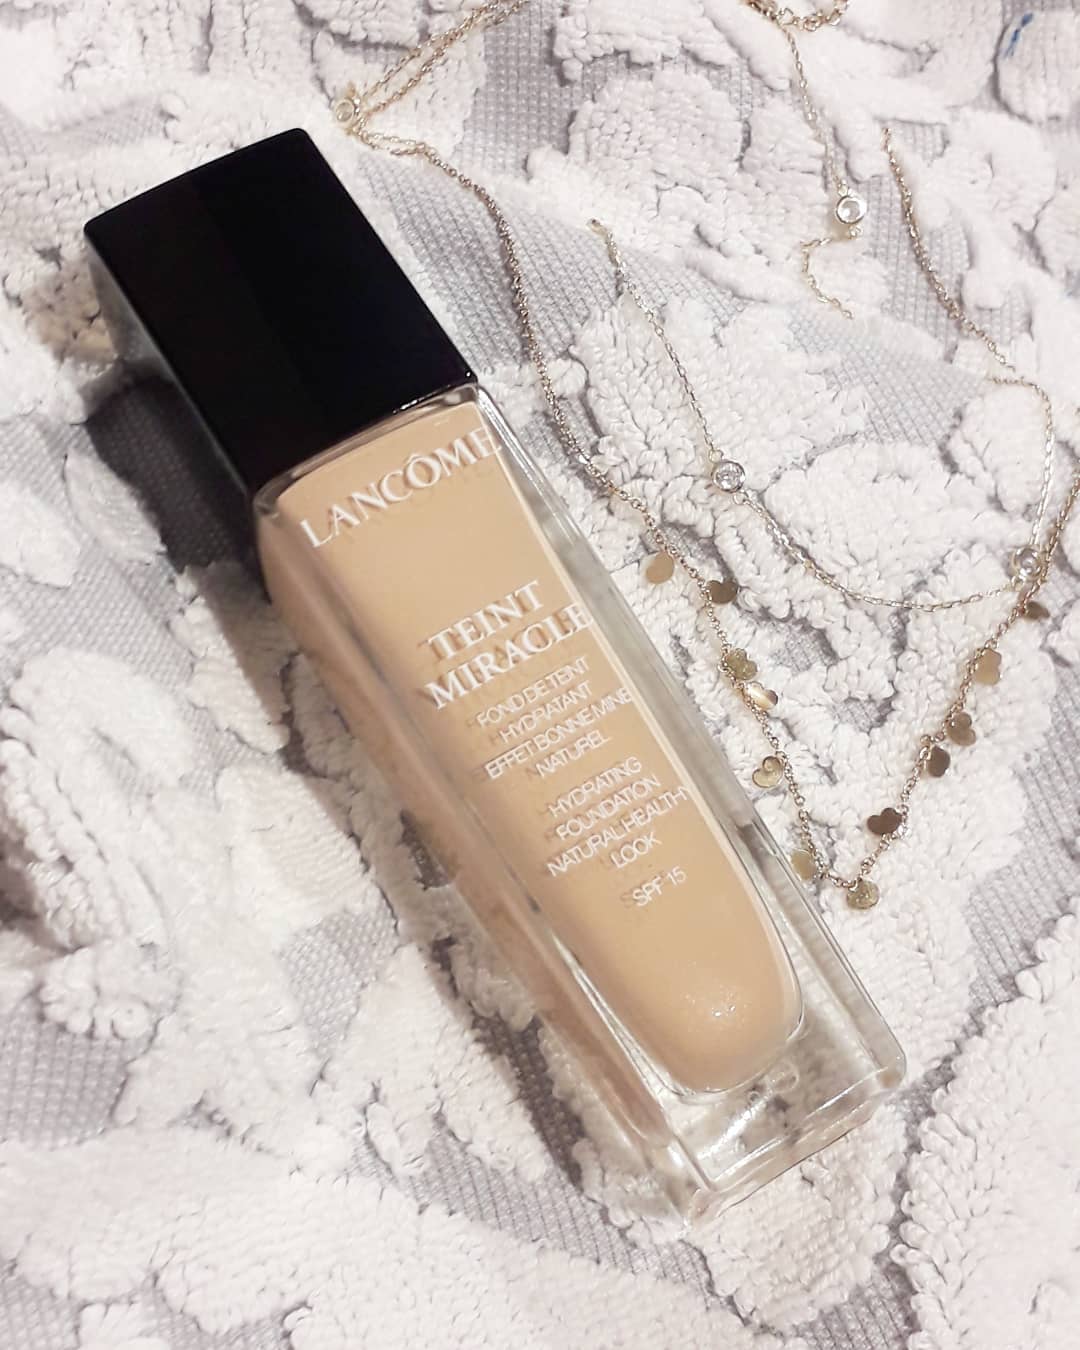 LANCOME,LANCOME Teint Miracle Hydrating Foundation,LANCOME Teint Miracle Hydrating Foundation ราคา,LANCOME Teint Miracle Hydrating Foundation รีวิว,LANCOME Teint Miracle Hydrating Foundation reviews,LANCOME Teint Miracle Hydrating Foundation swatch